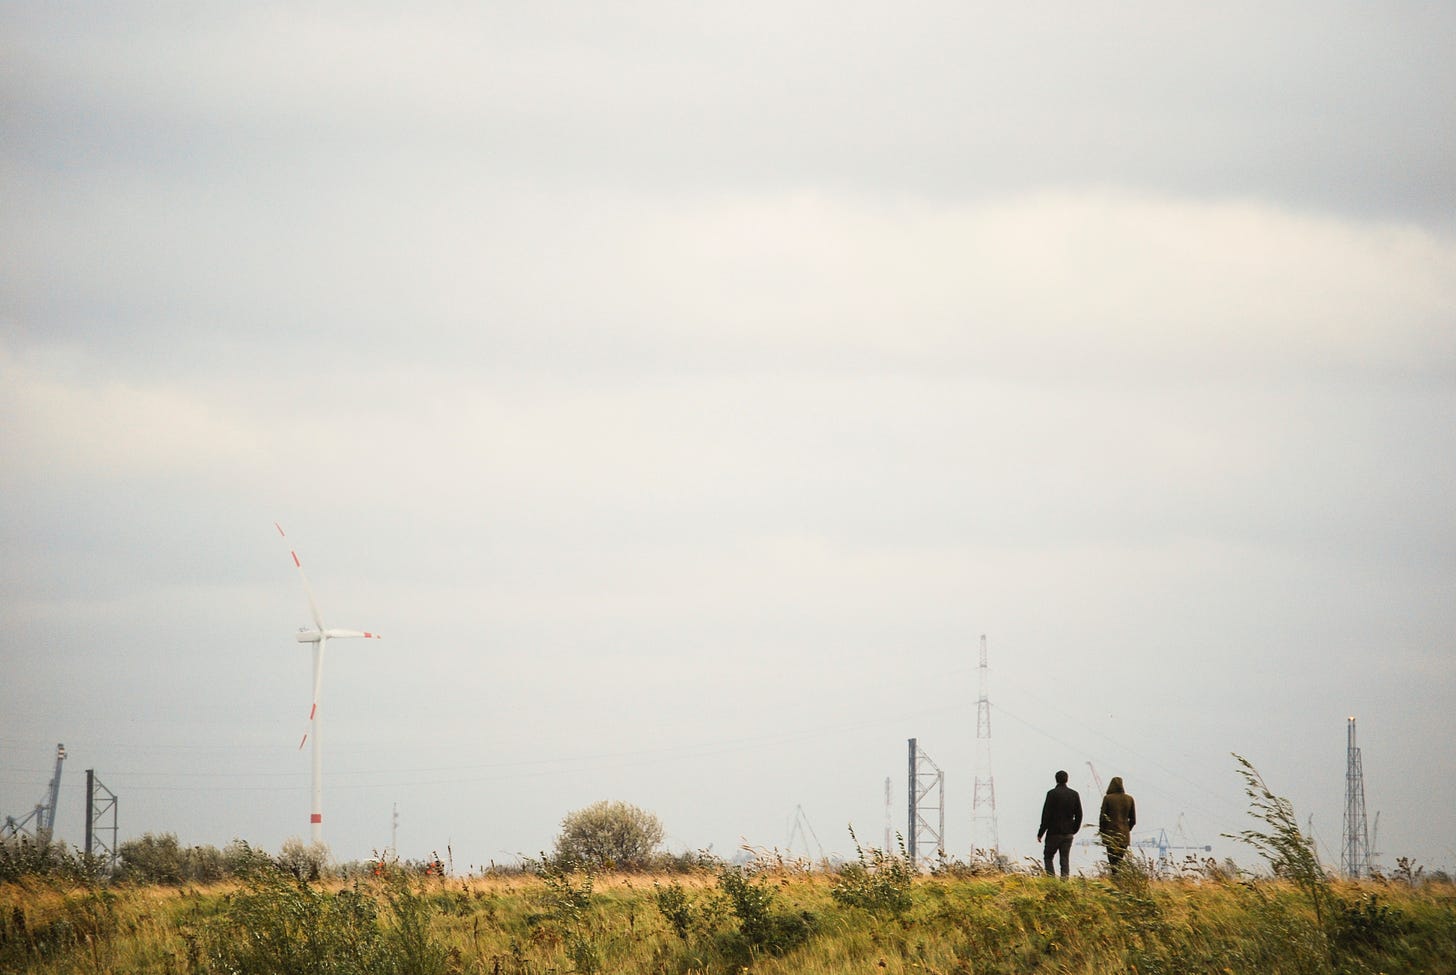 Two people walking in a field on a cloudy day.